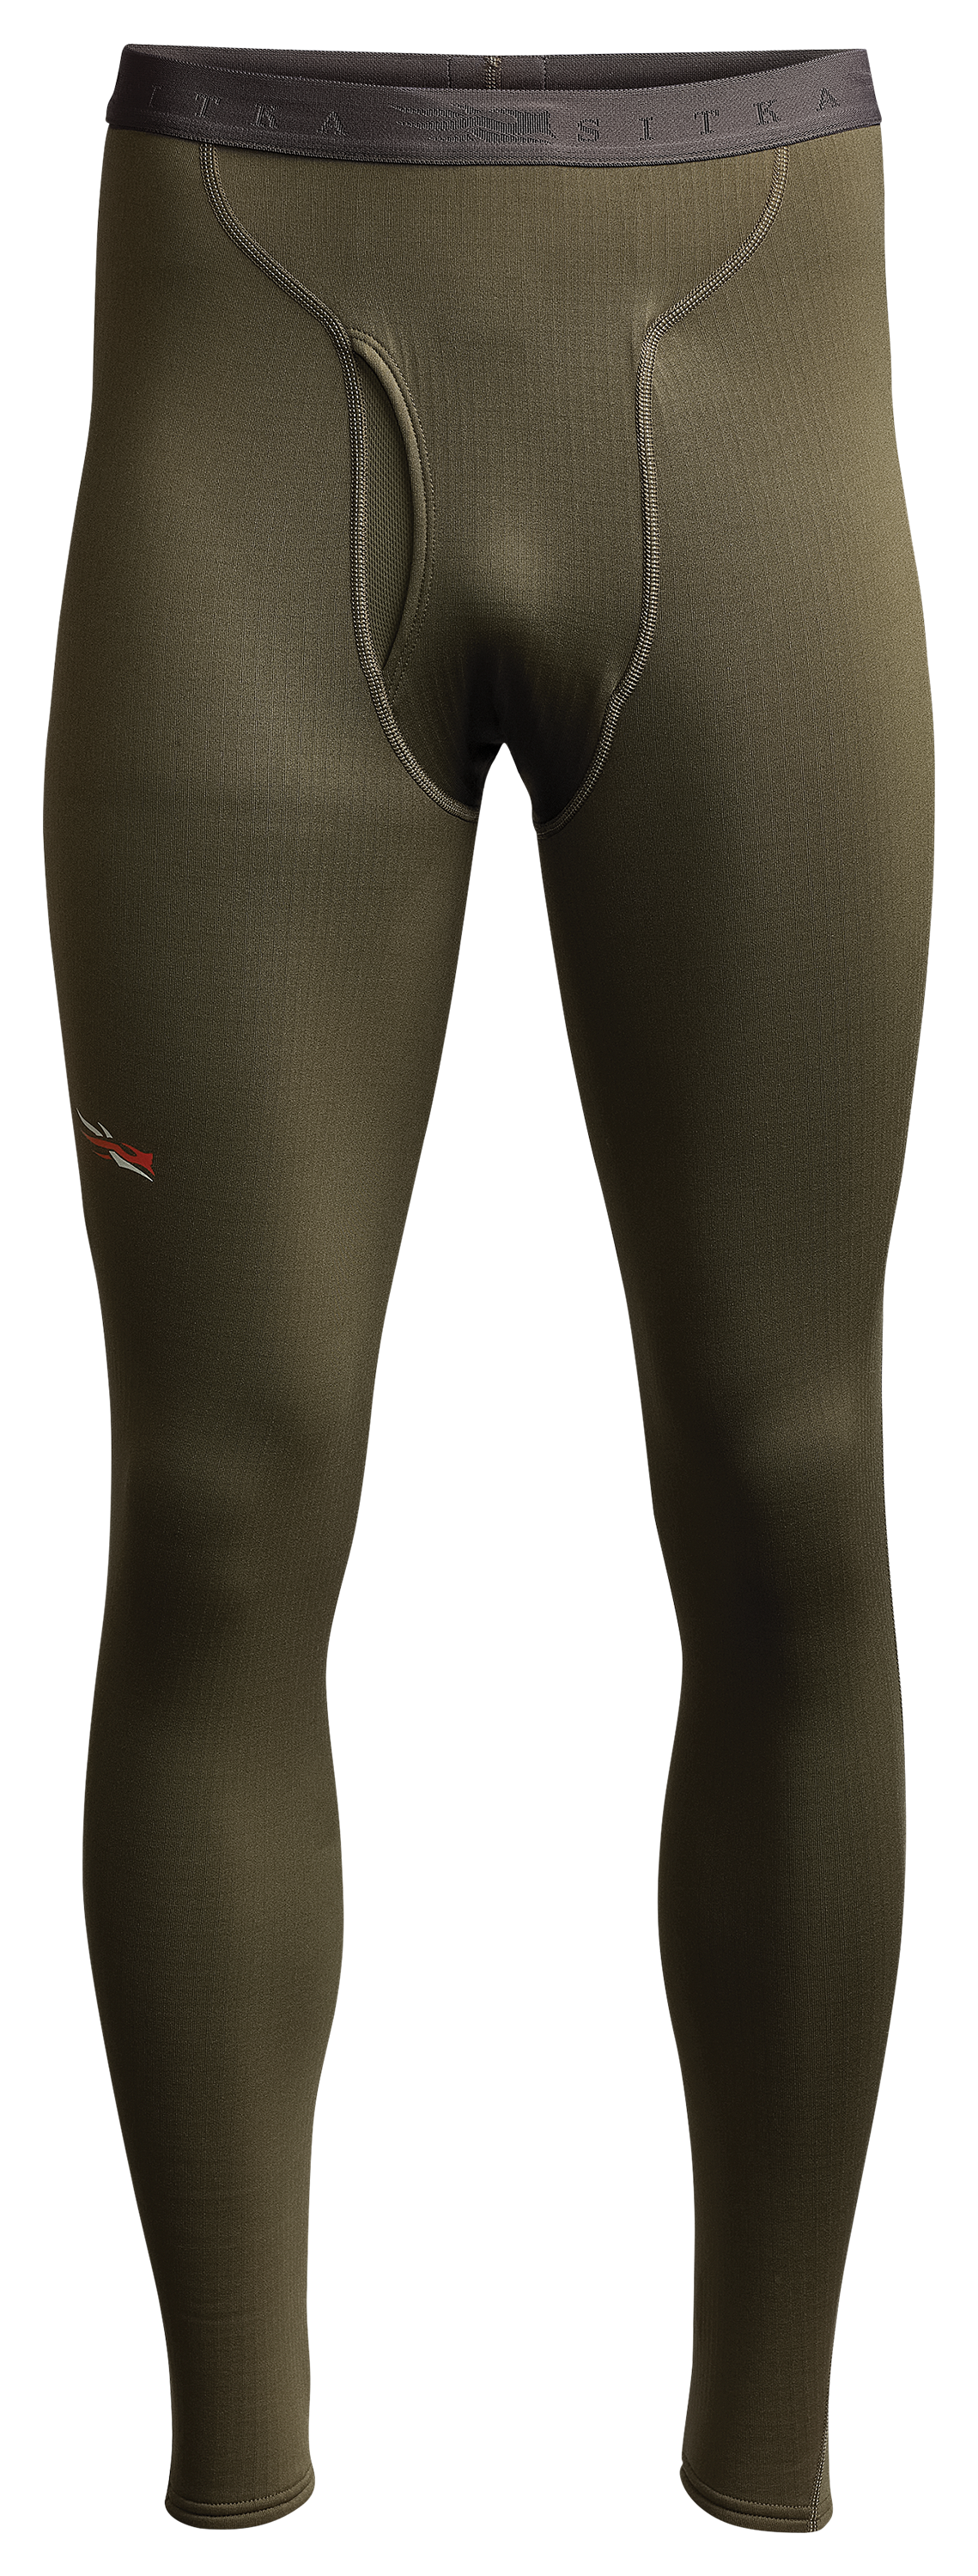 Under Armour Base Layer Pants, Leggings & Tights for Men & Women